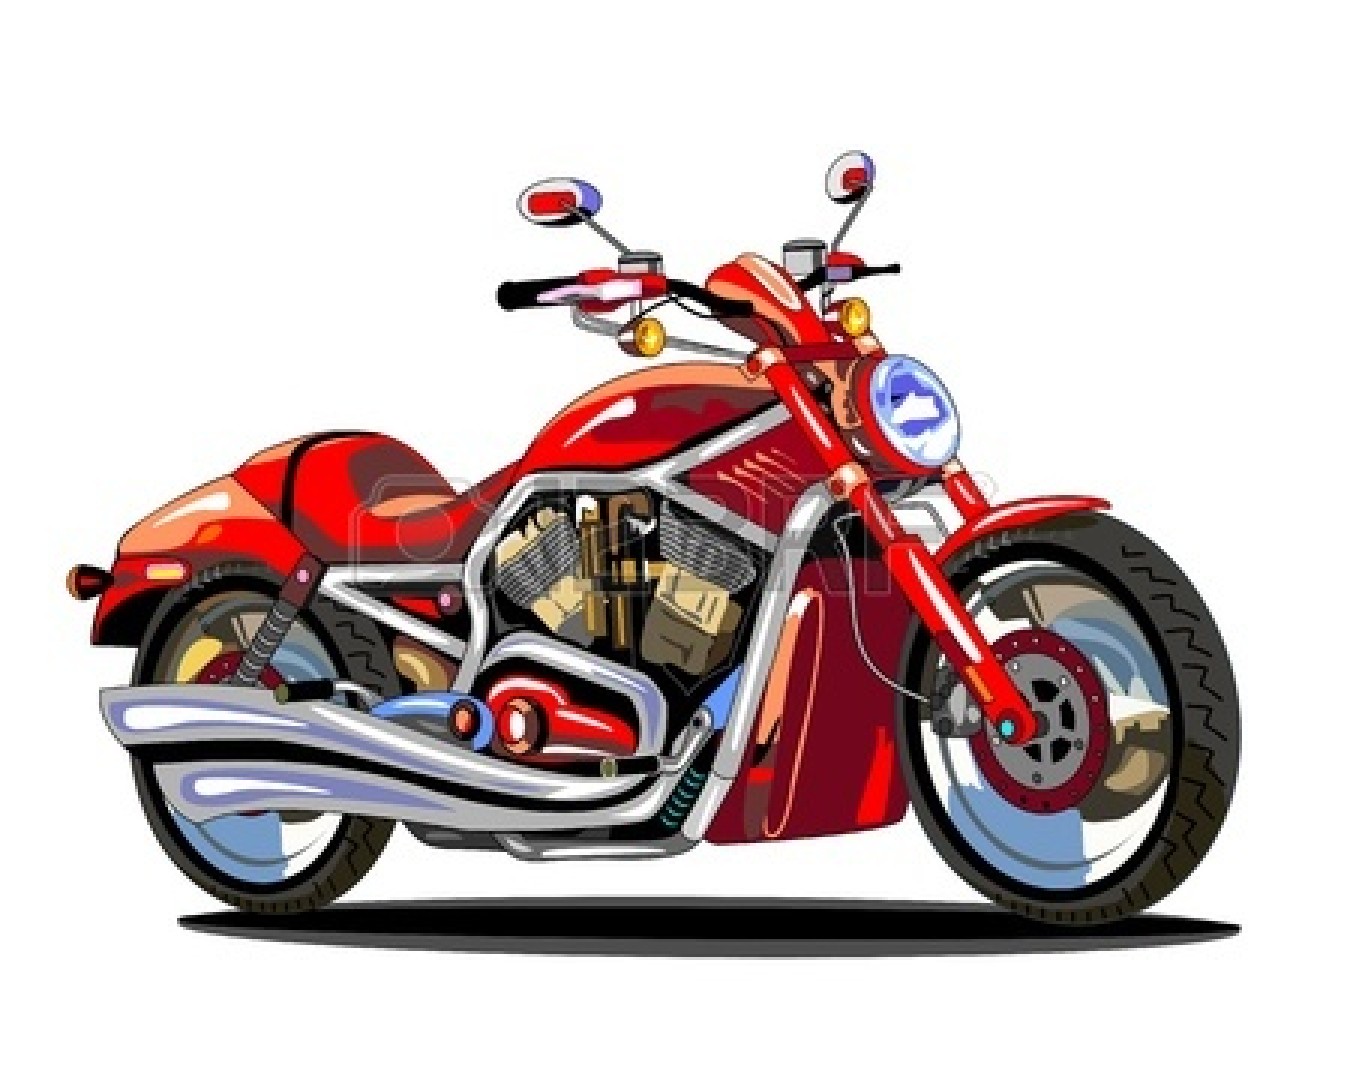 Animated motorcycle clipart.